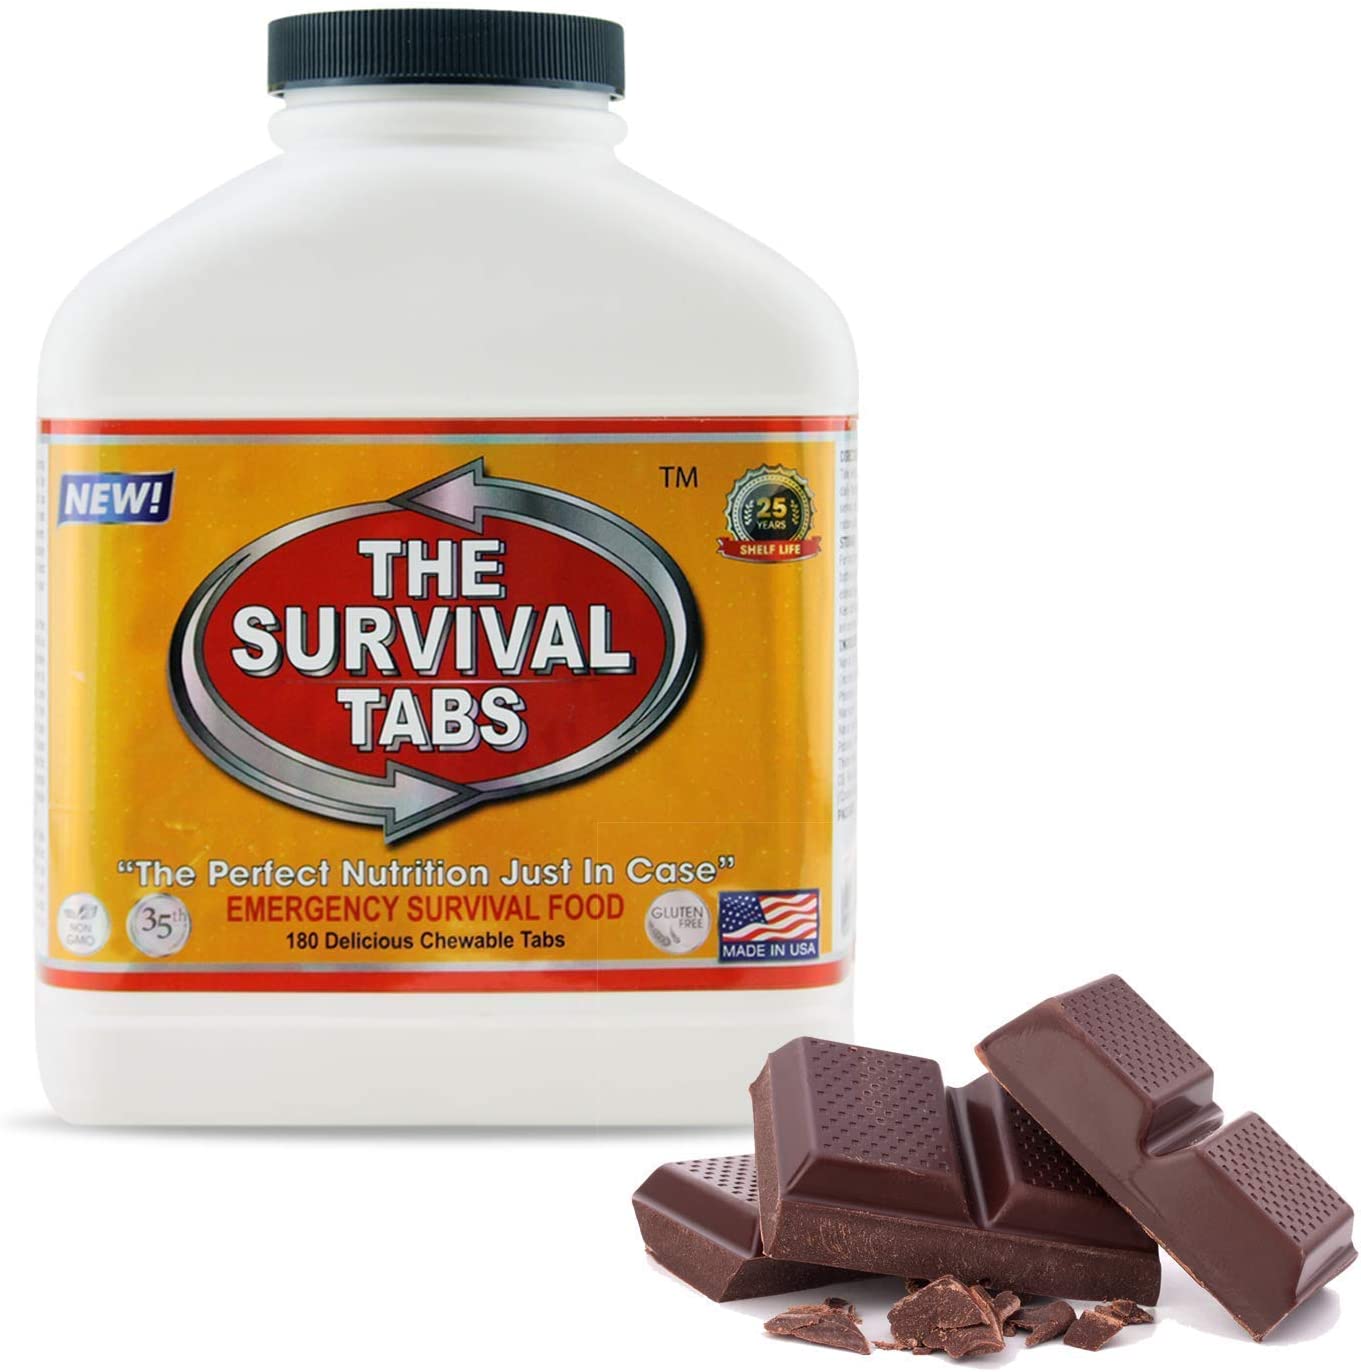 Survival food 15 days survival food supply gluten free and non-GMO chocolate exp 25 years